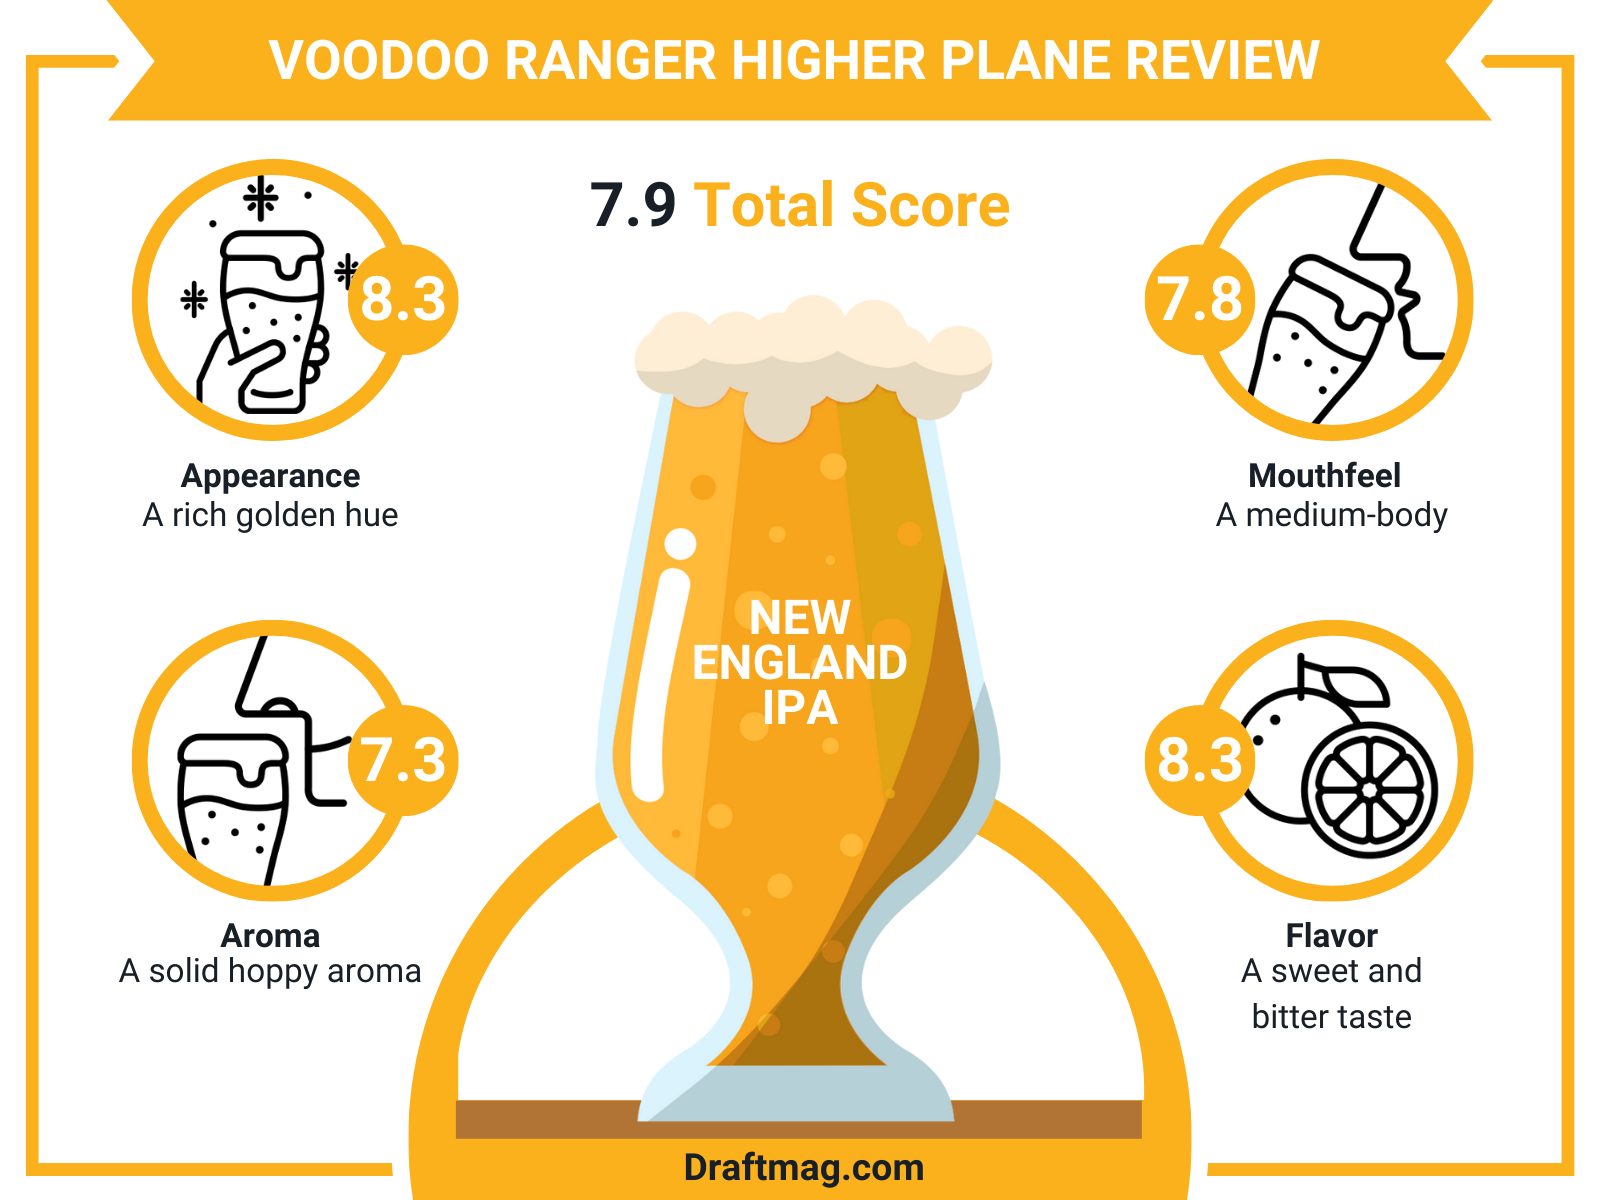 Higher Plane Review Infographic